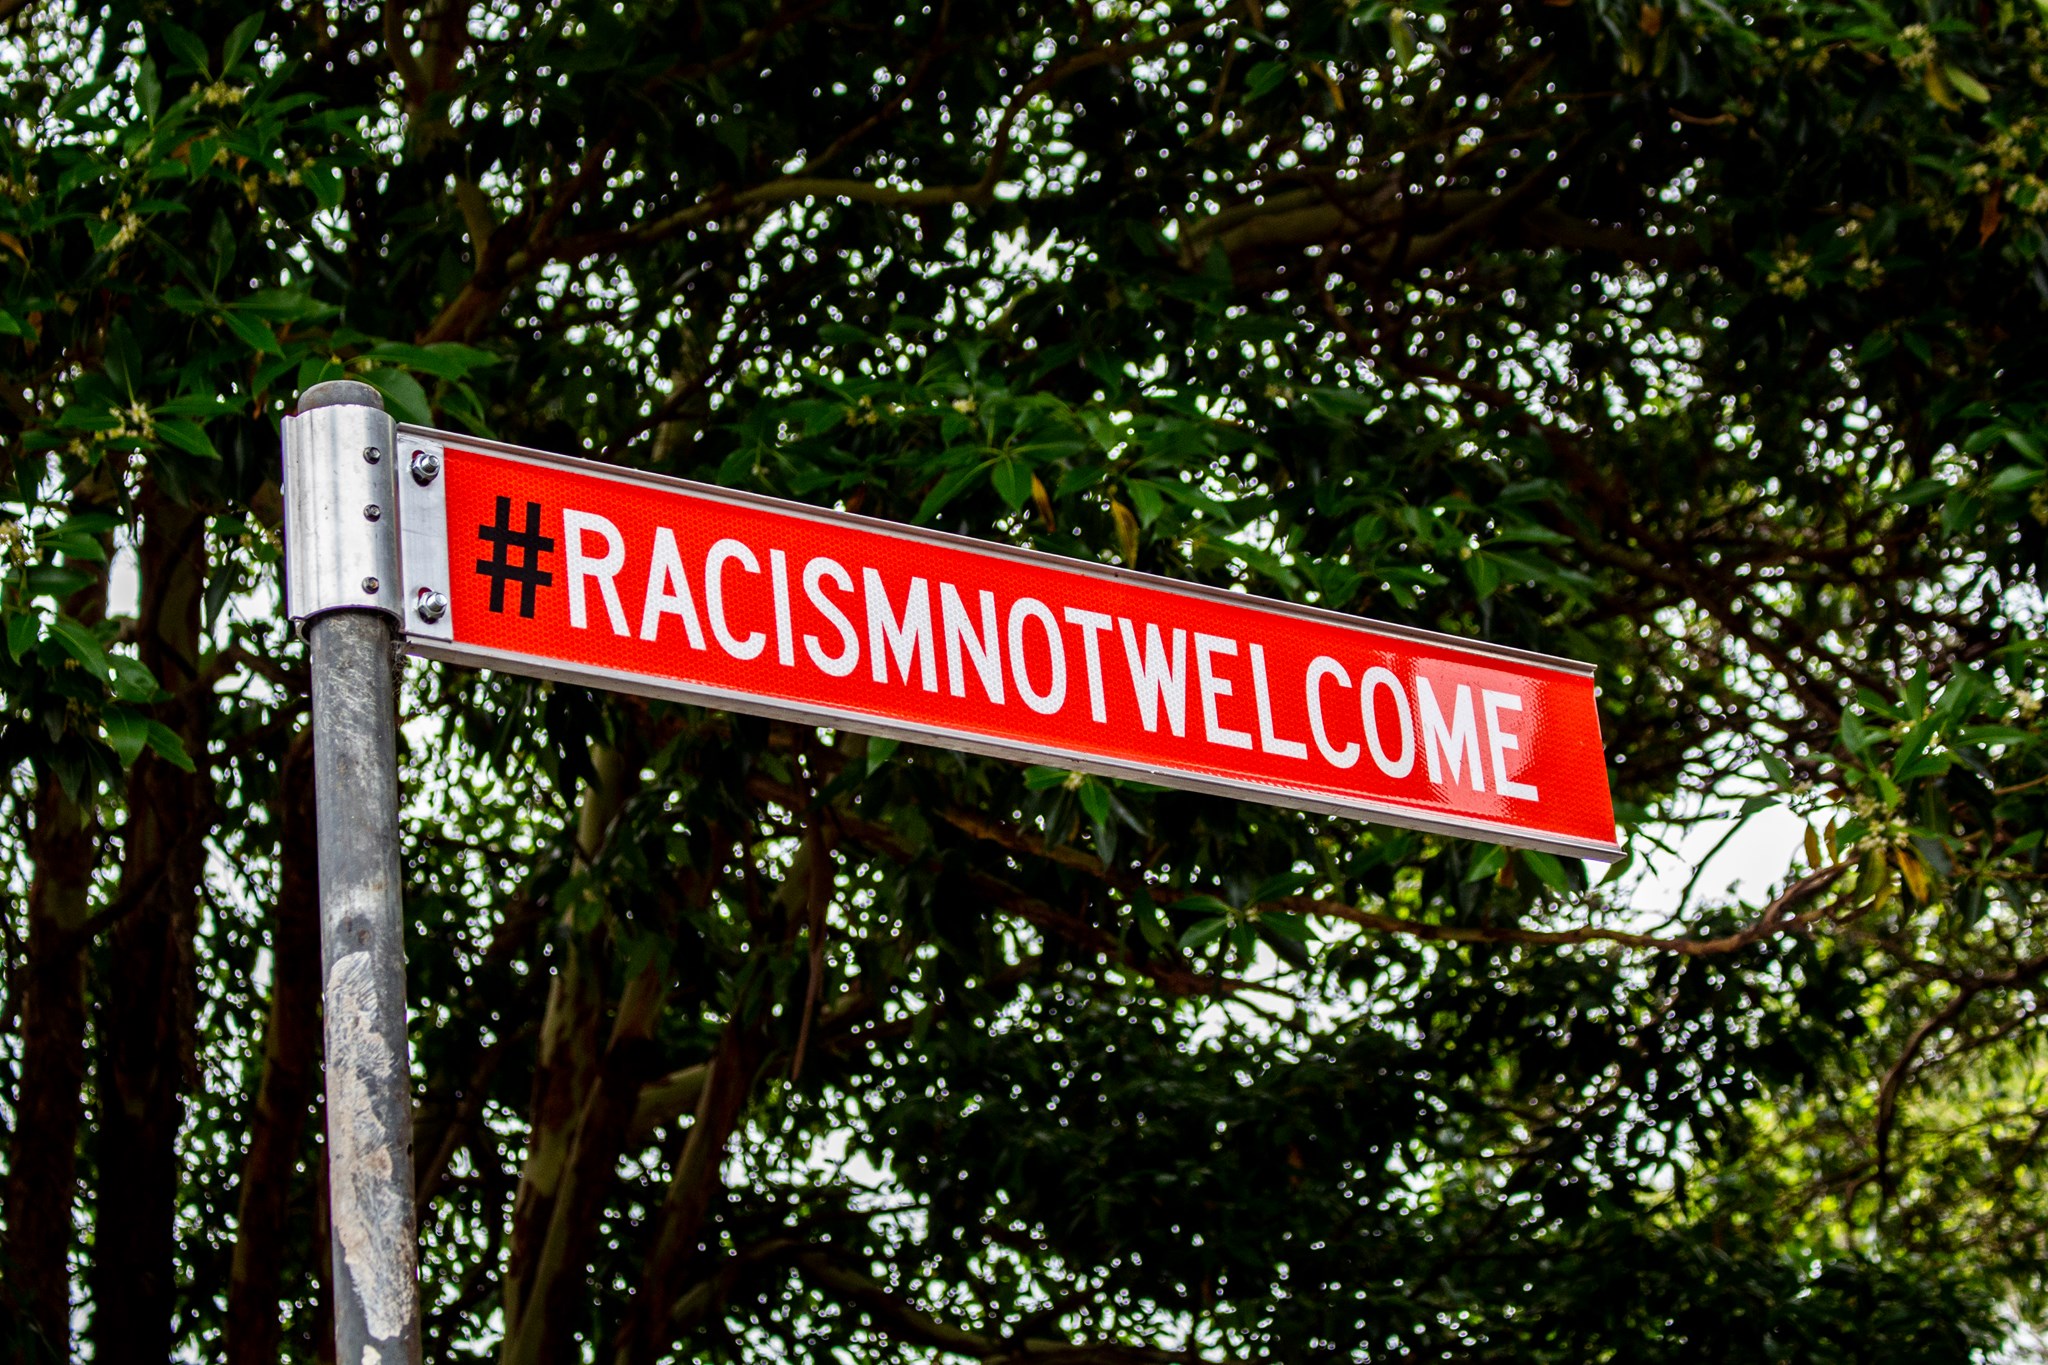 Woollahra councillors move to take down Racism Not Welcome signs